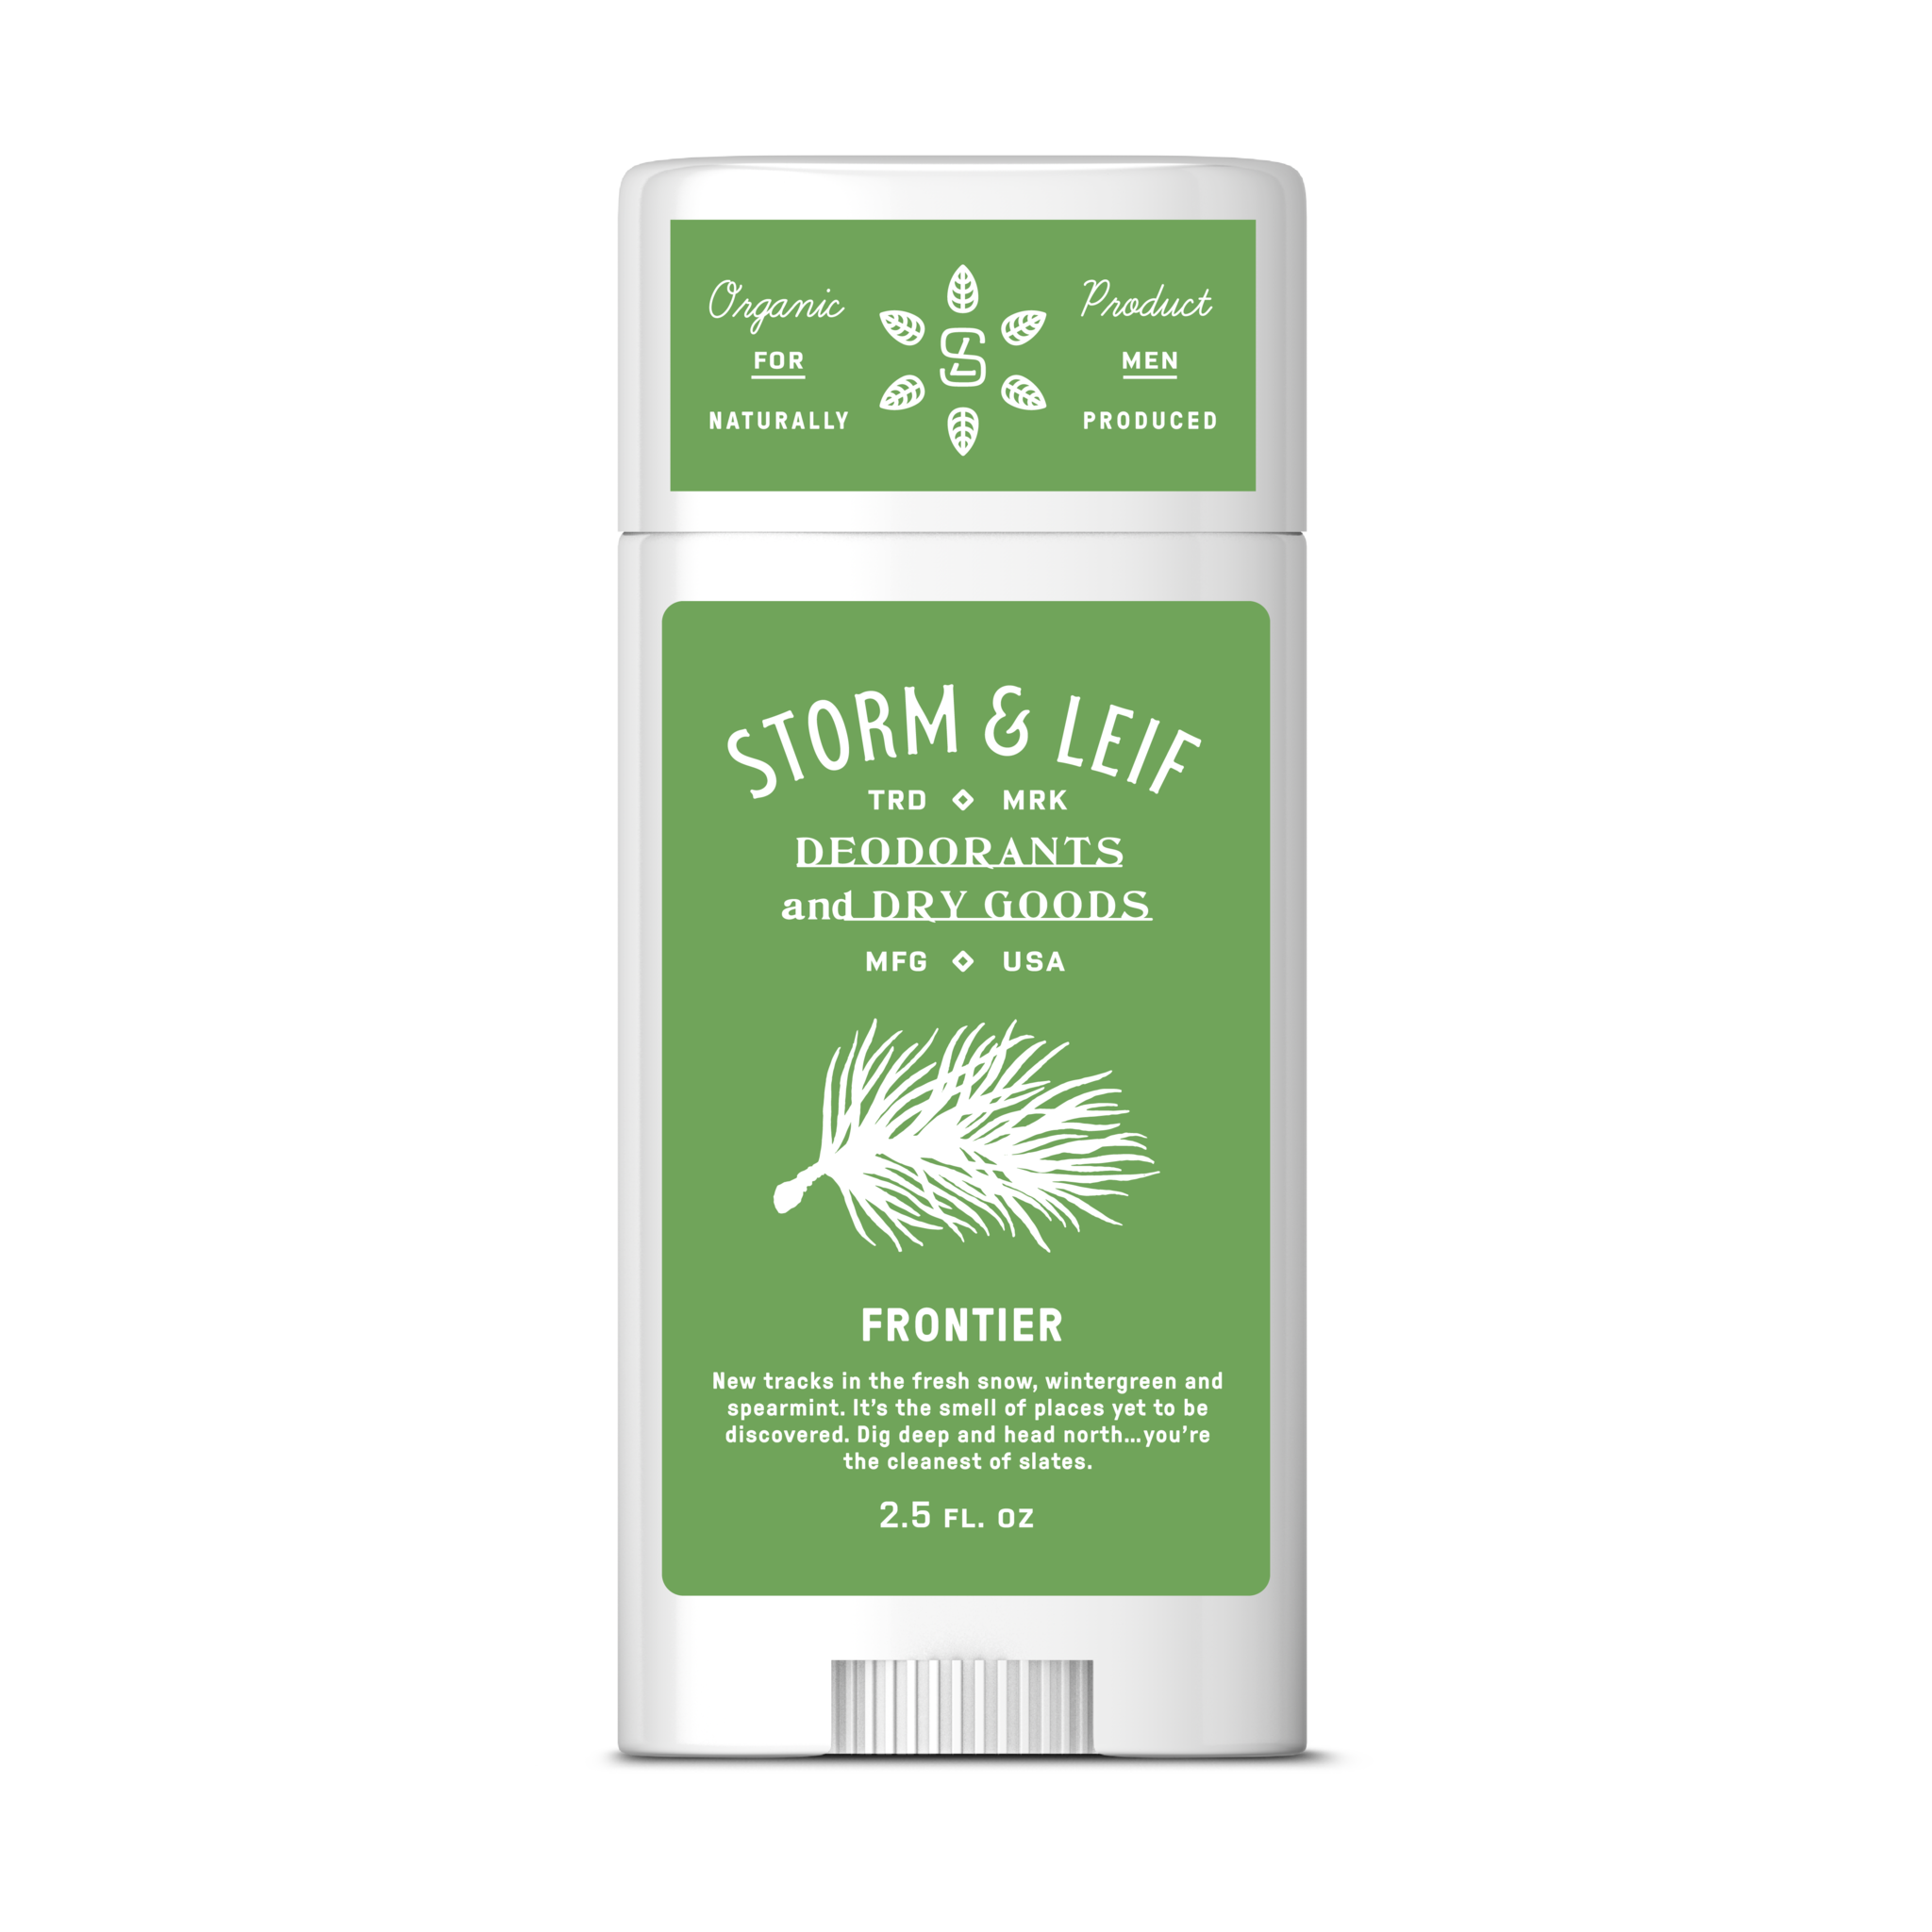 Frontier vegan deodorant for teenagers and men by Storm & Leif